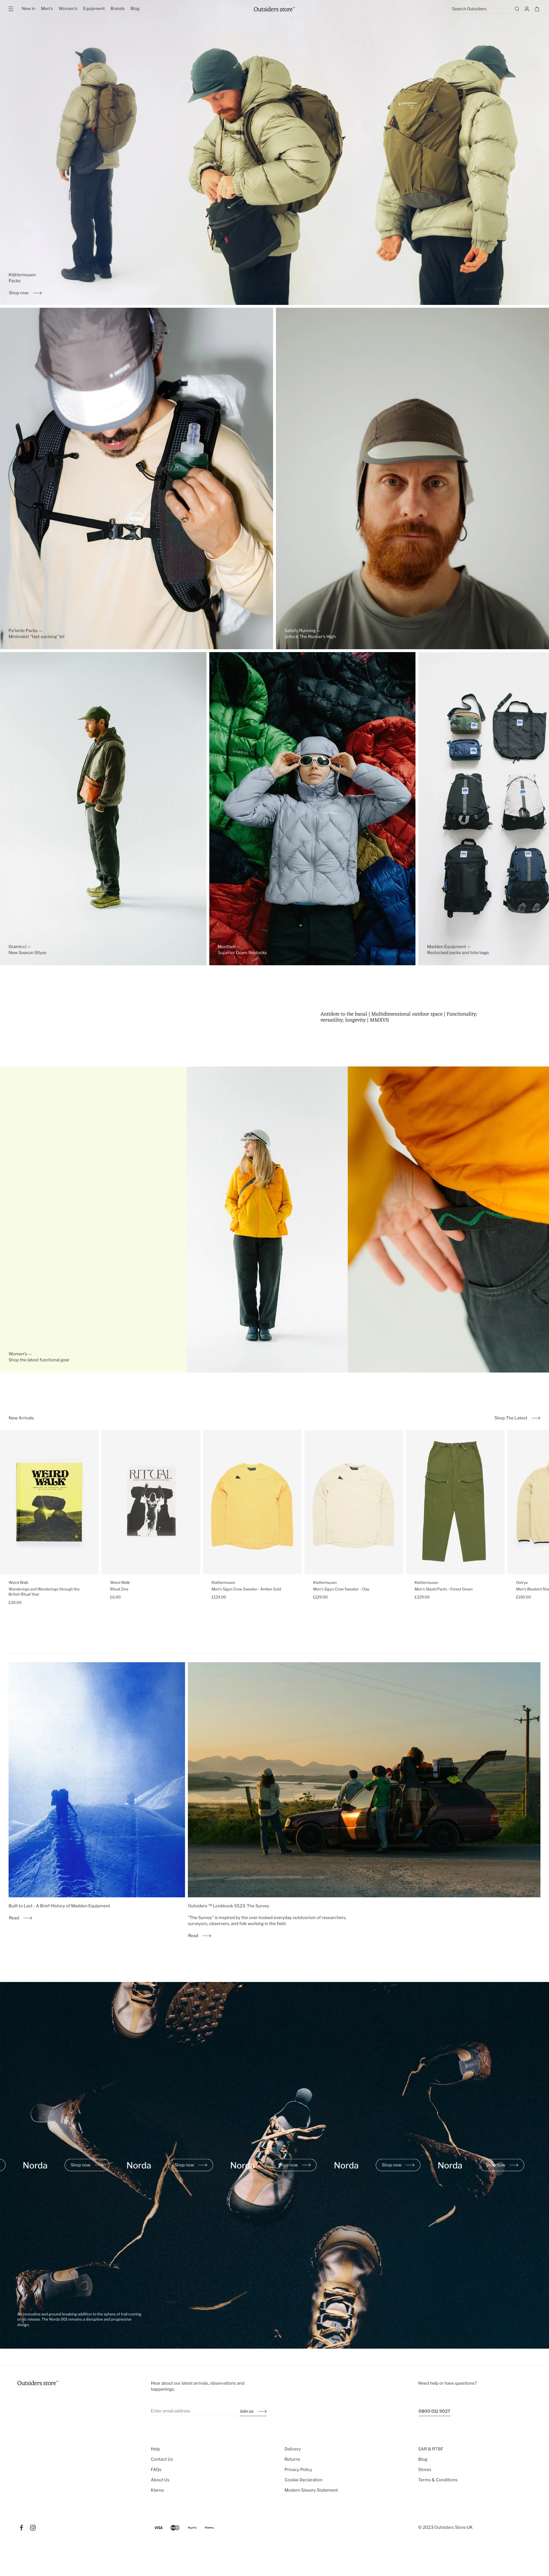 Outsiders Store Landing Page Example: Explore the latest functional clothing, footwear and equipment for both men & women.